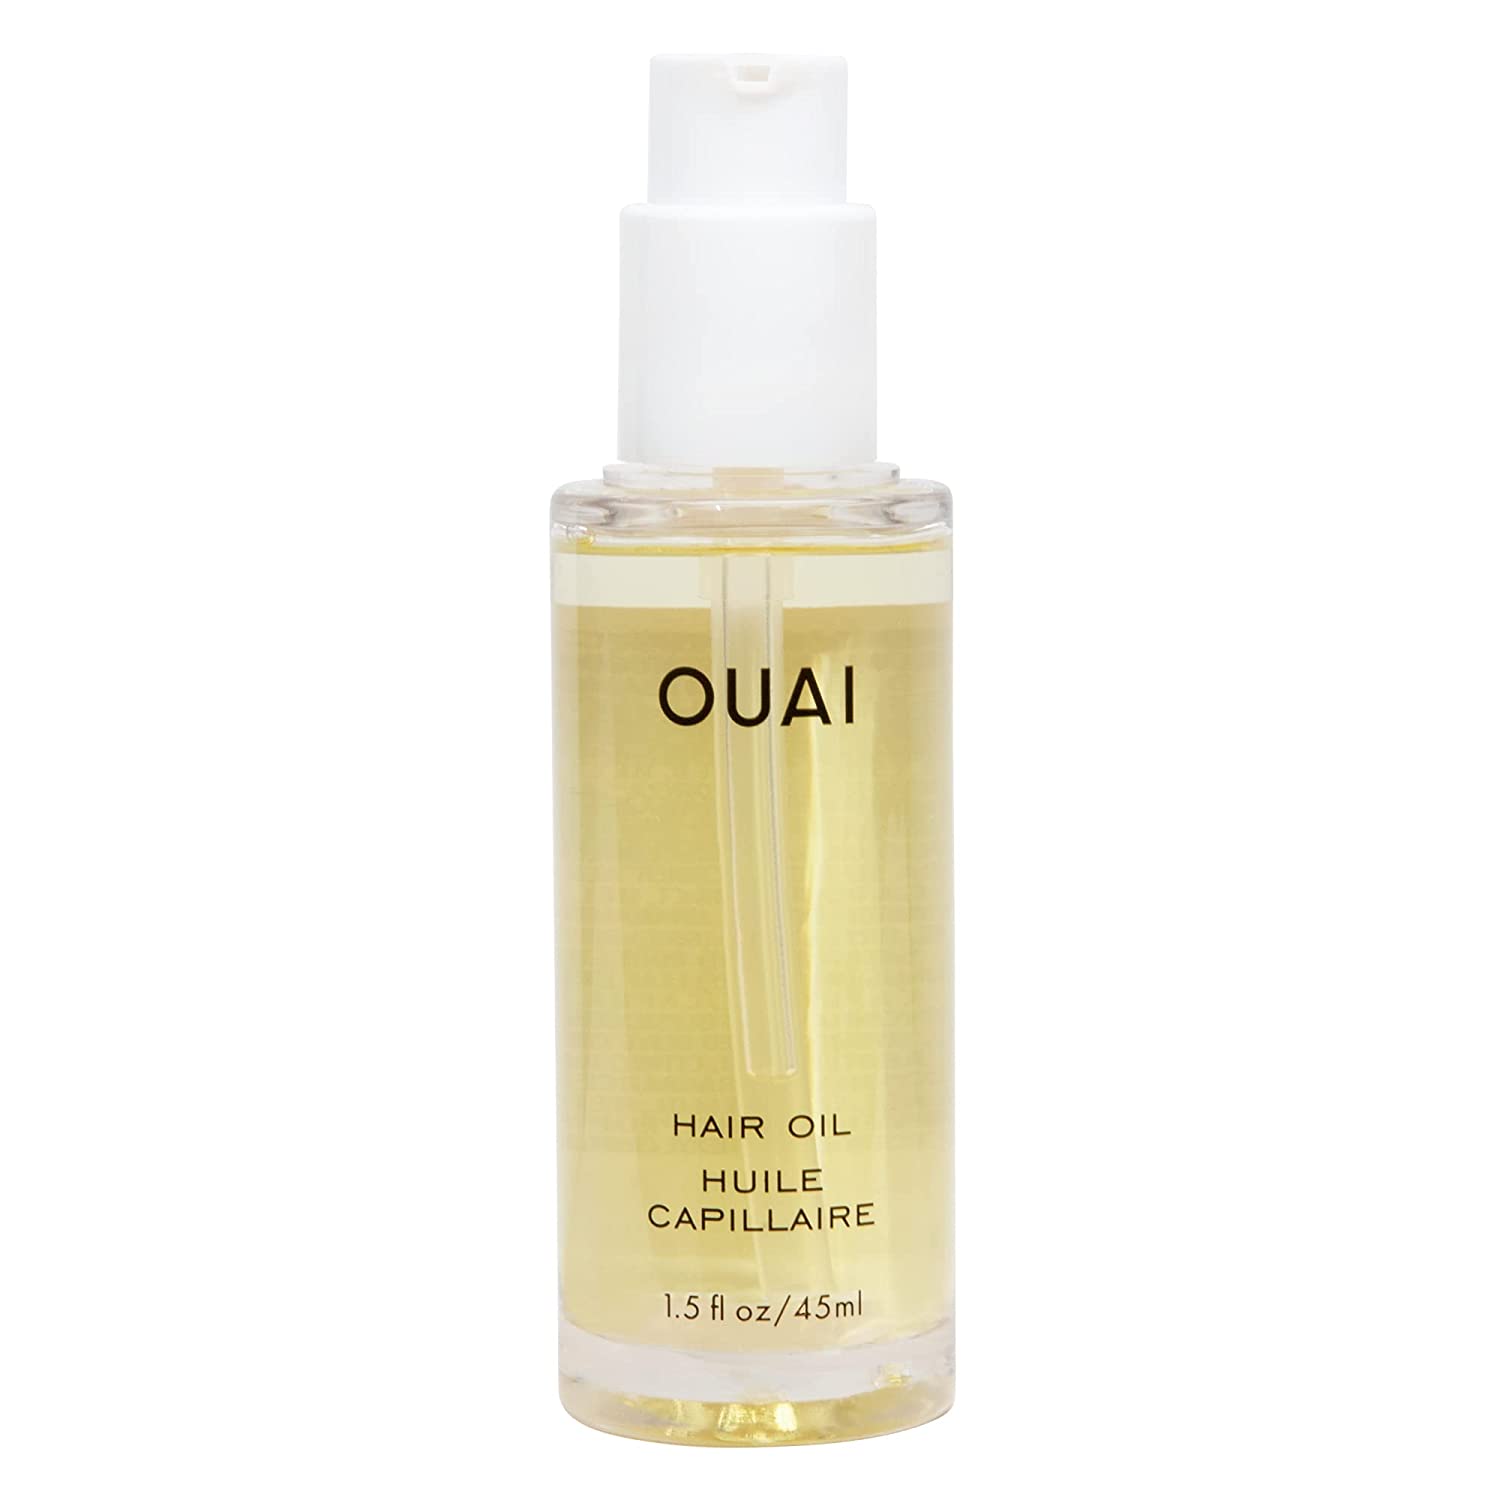 OUAI Hair Oil, Multitasking Oil Protects from UV/Heat Damage and Frizz